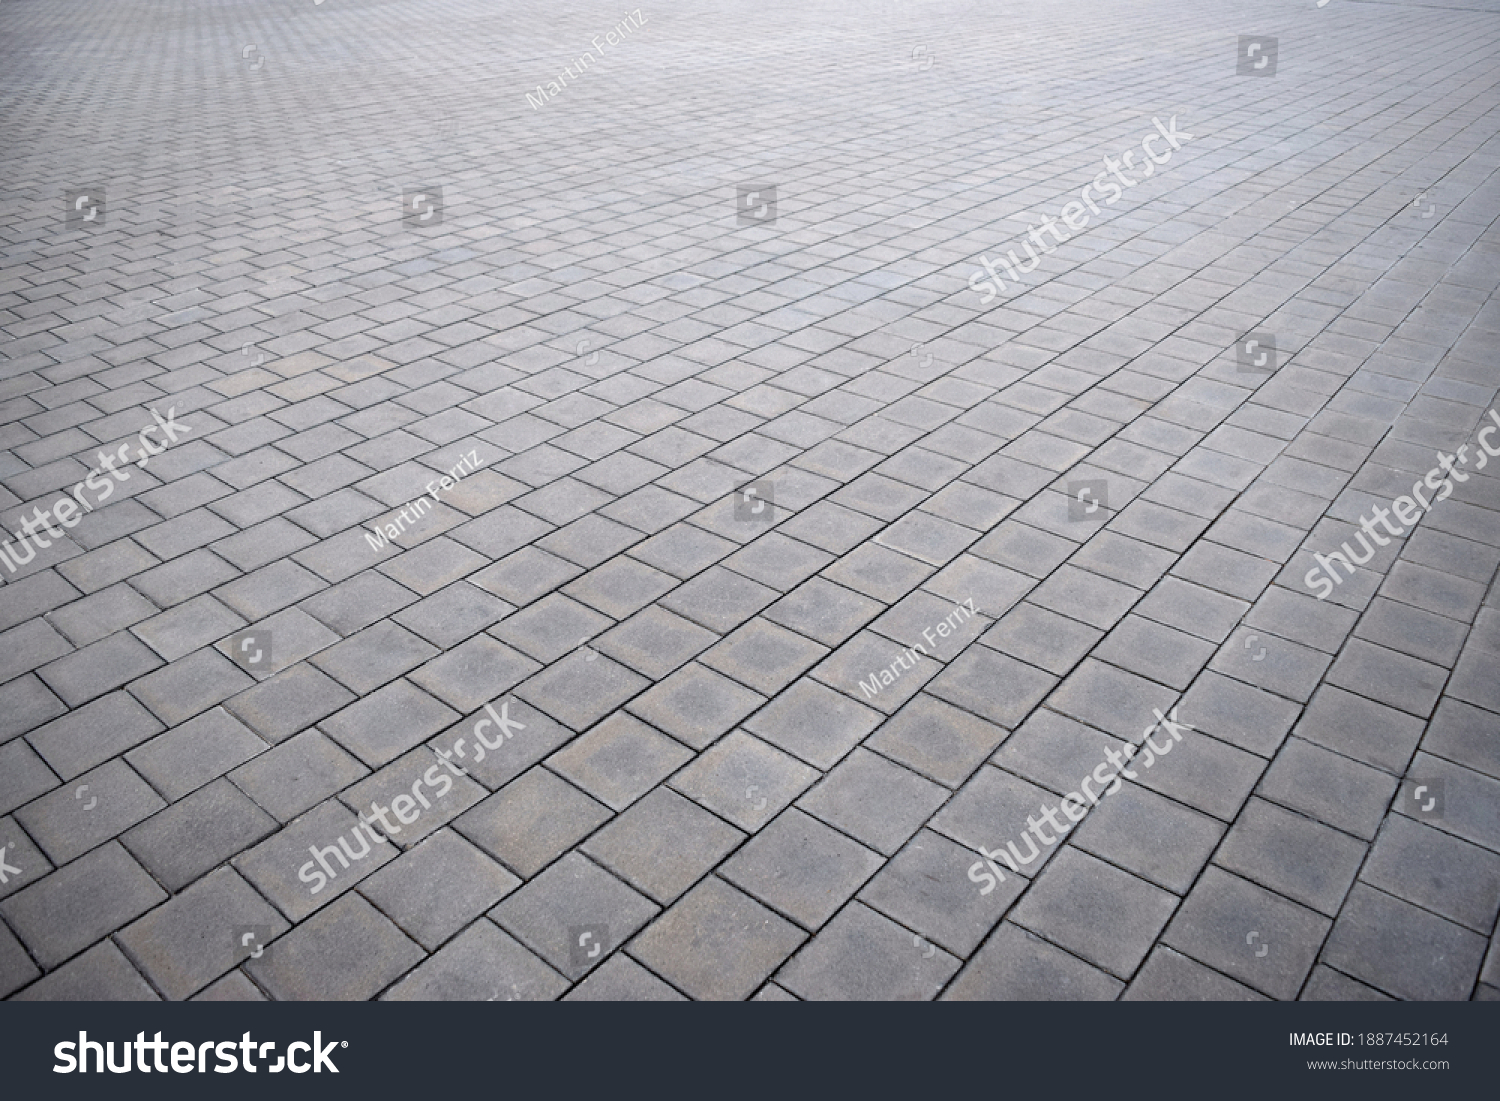 Surface of a paving stones ground in perspective #1887452164